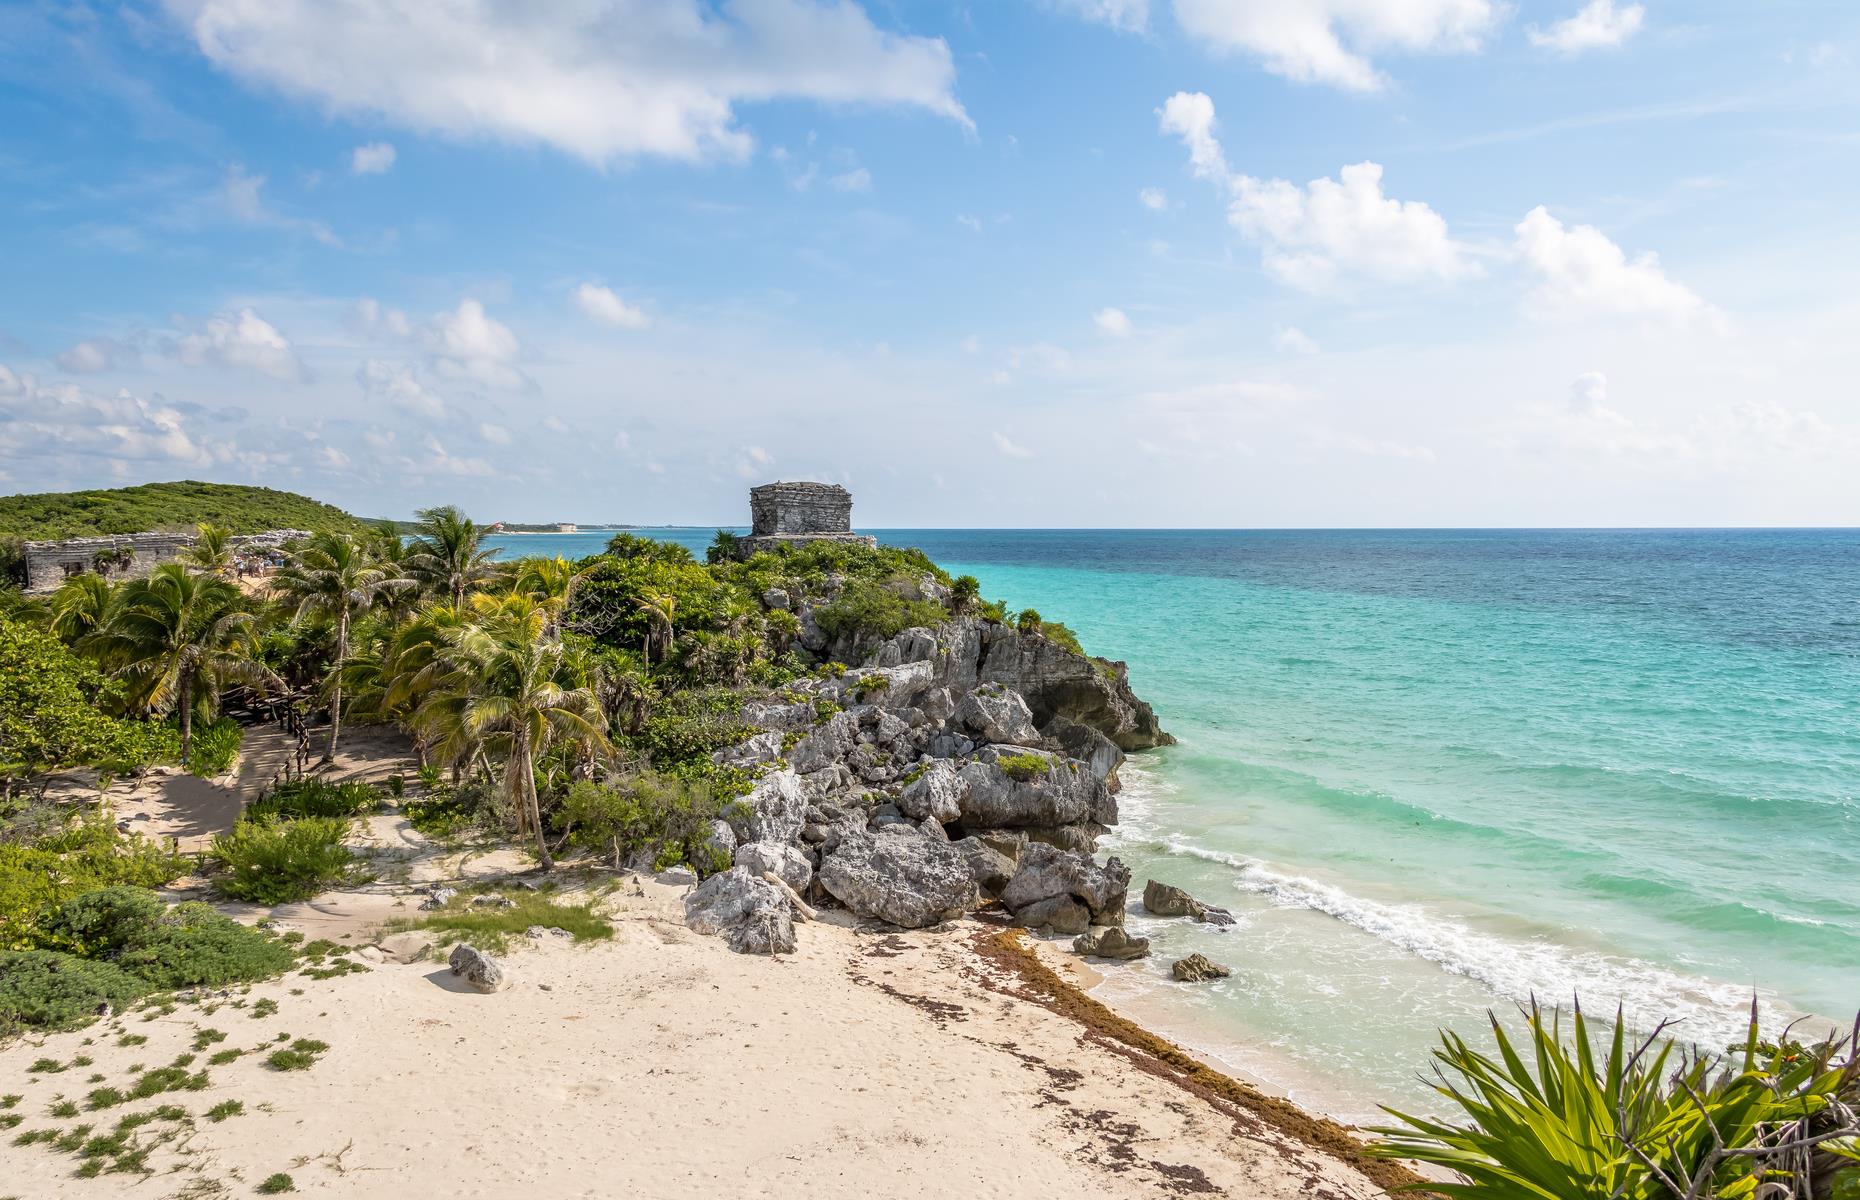 <p>Why choose between beautiful beaches, lush vegetation and ancient ruins when you can enjoy them all at once? Tulum is the only coastal Maya city and is popular with tourists thanks to its laid-back, New Age vibe. When you tire of lounging by the sea, head to the Castillo (pictured), perched on the edge of a 39-foot-high (12m) limestone cliff. Just be careful negotiating the steep steps on your way down.</p>  <p><a href="https://www.loveexploring.com/galleries/75464/the-worlds-most-dangerous-beaches?page=1"><strong>These are the most dangerous beaches in the world</strong></a></p>